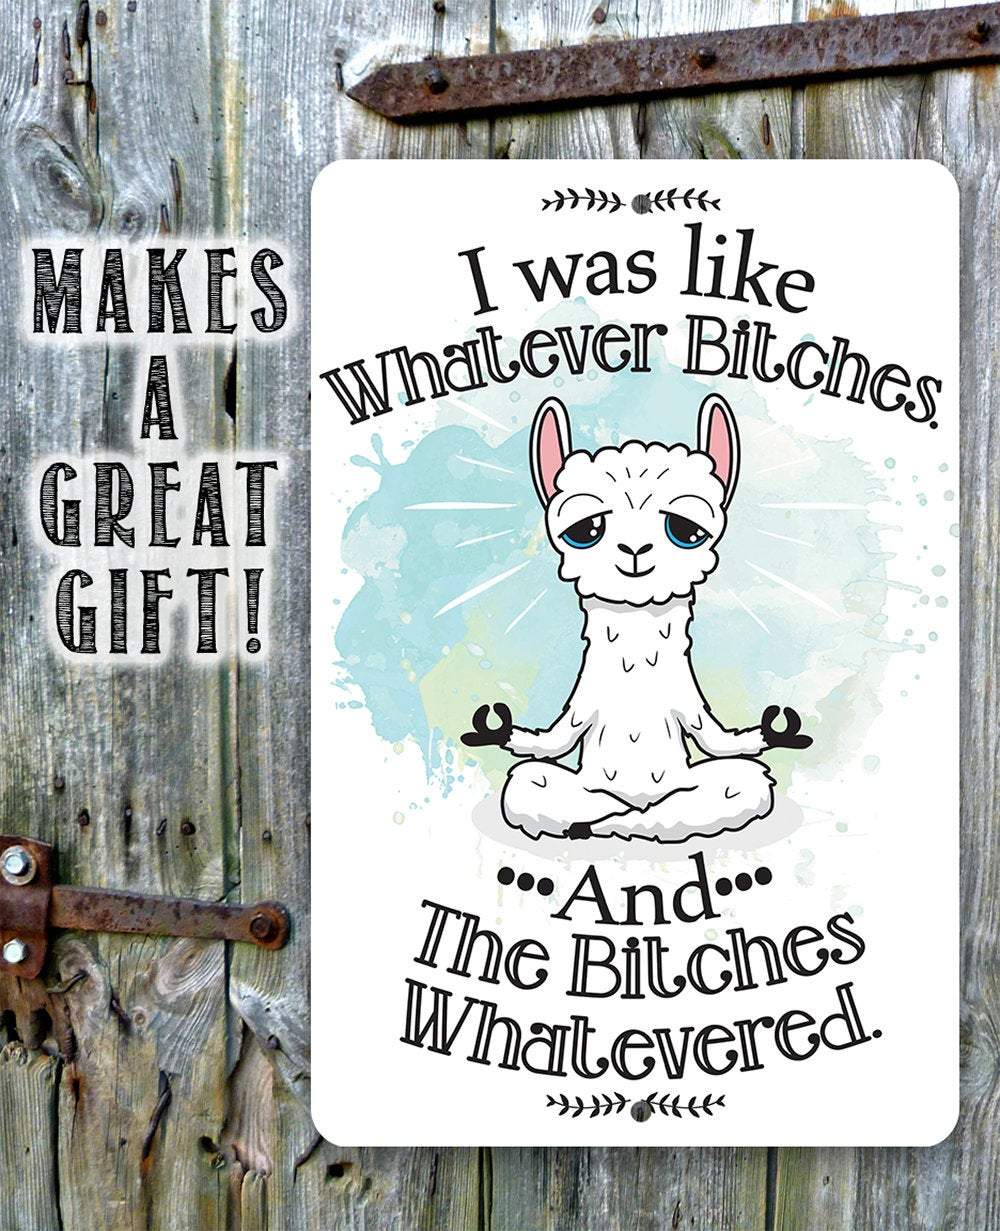 I Was Like Whatever Bitches and the Bitches Whatevered - Metal Sign | Lone Star Art.